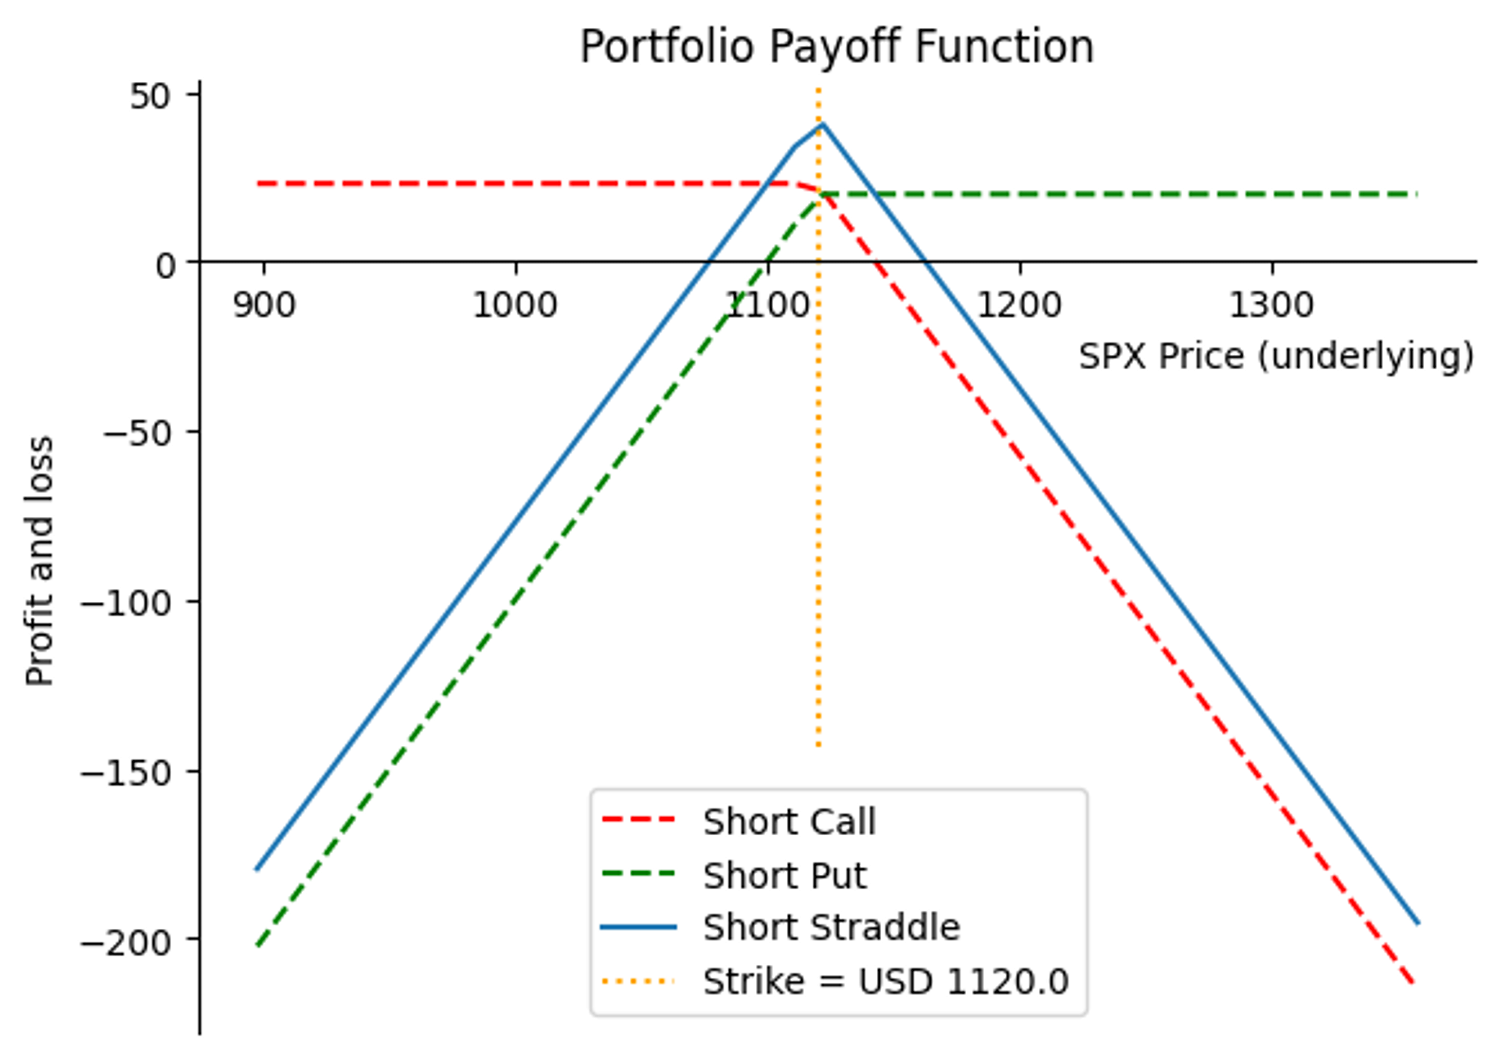 Payoff function plot for the Short Straddle strategy